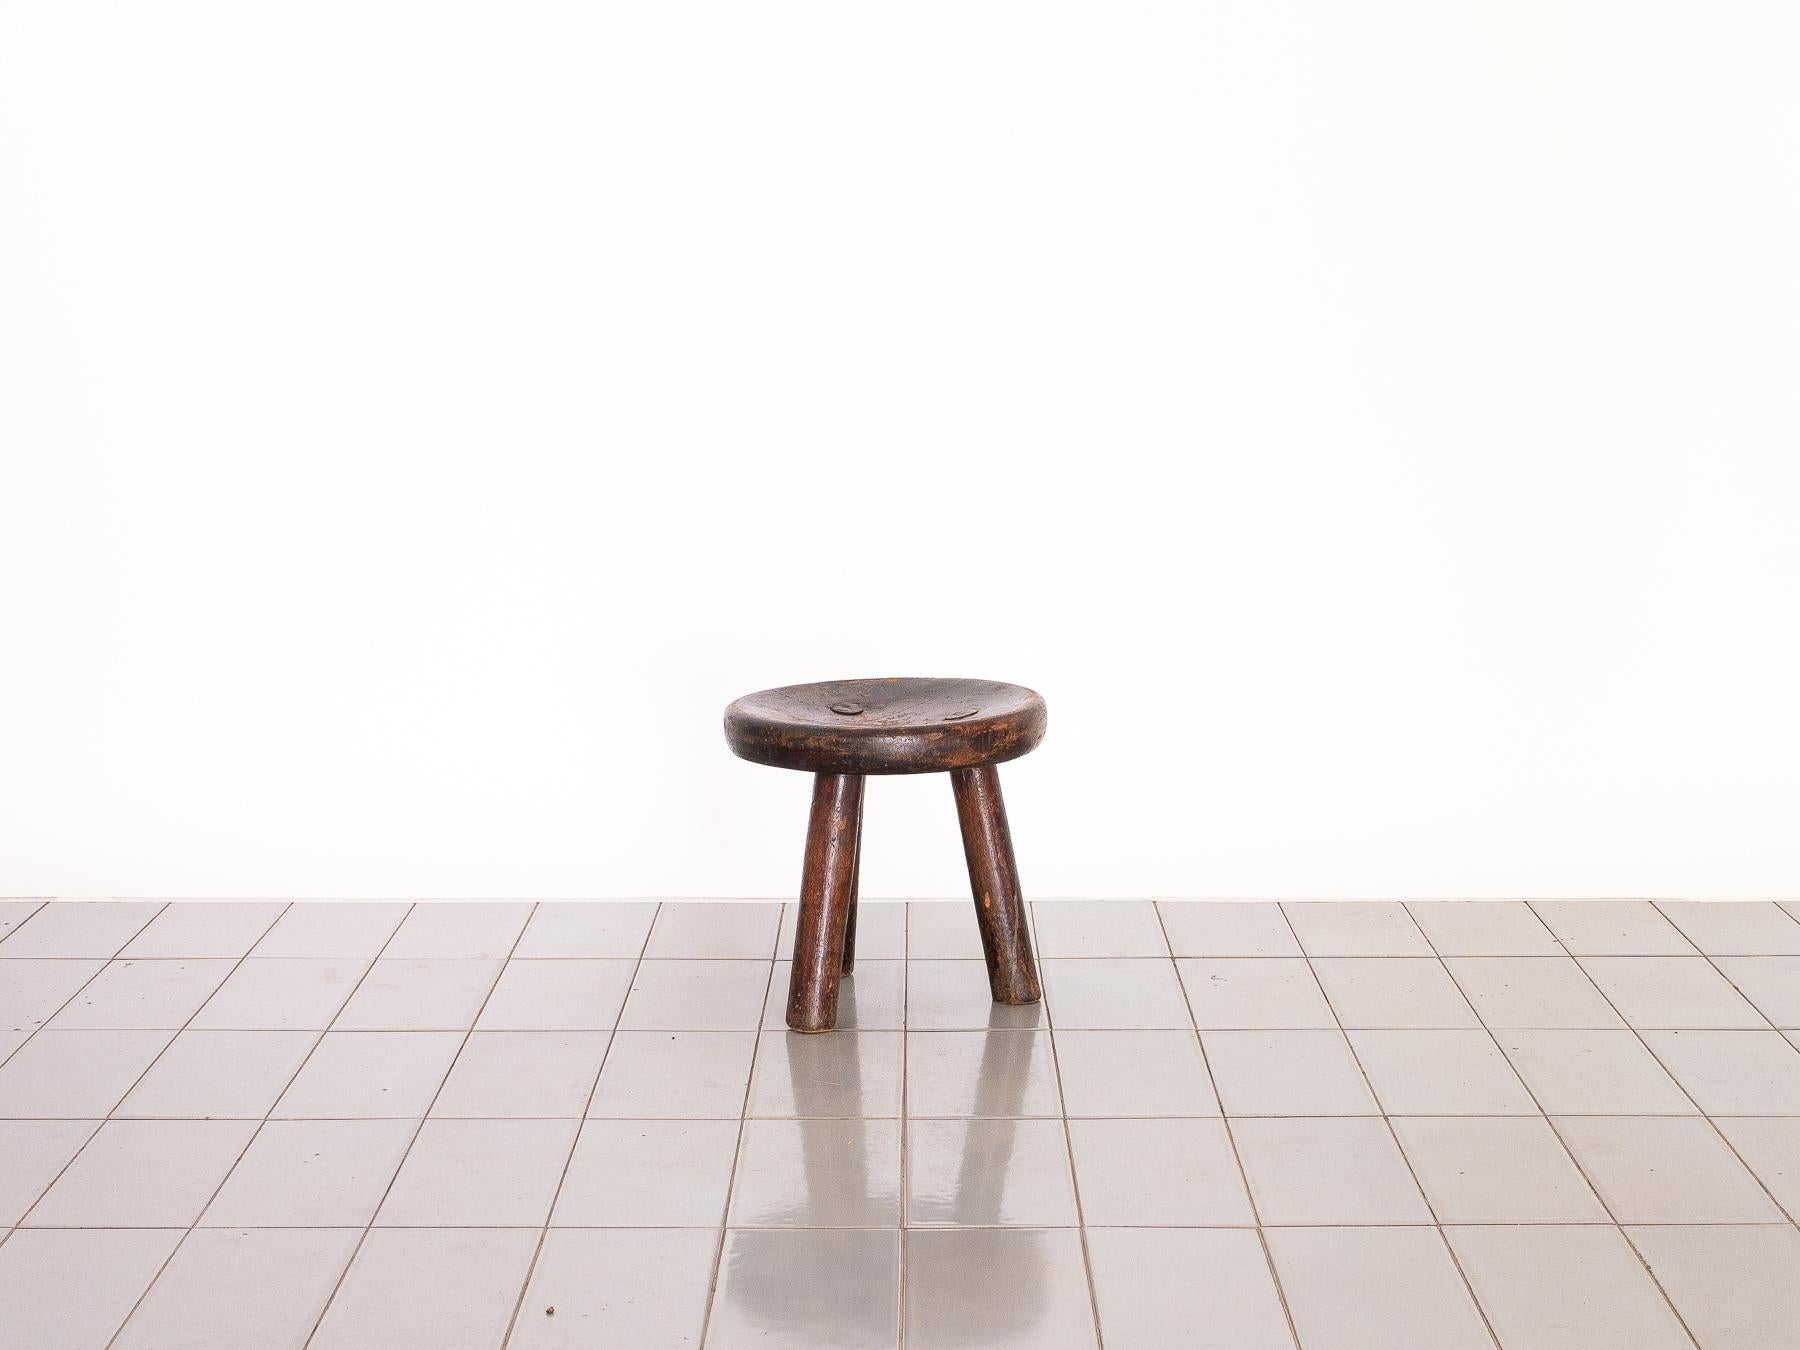 This stool comes from a selection of pieces acquired in a small and distant countryside town. The amazing patina and marks of the passage of time create the unique surface of each of the pieces.